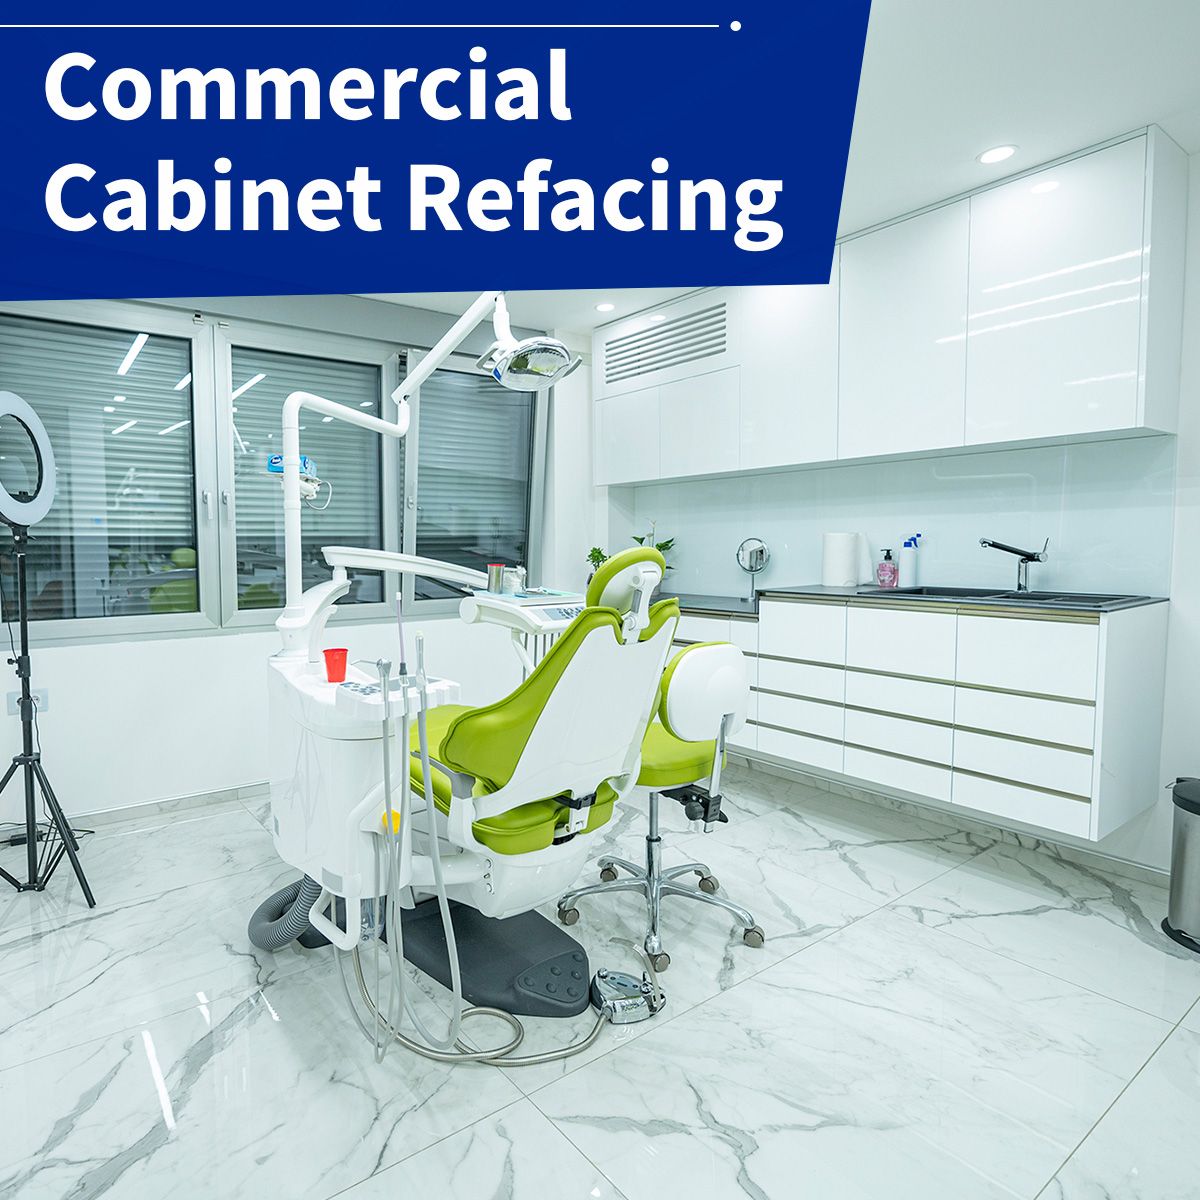 Commercial Cabinet Refacing